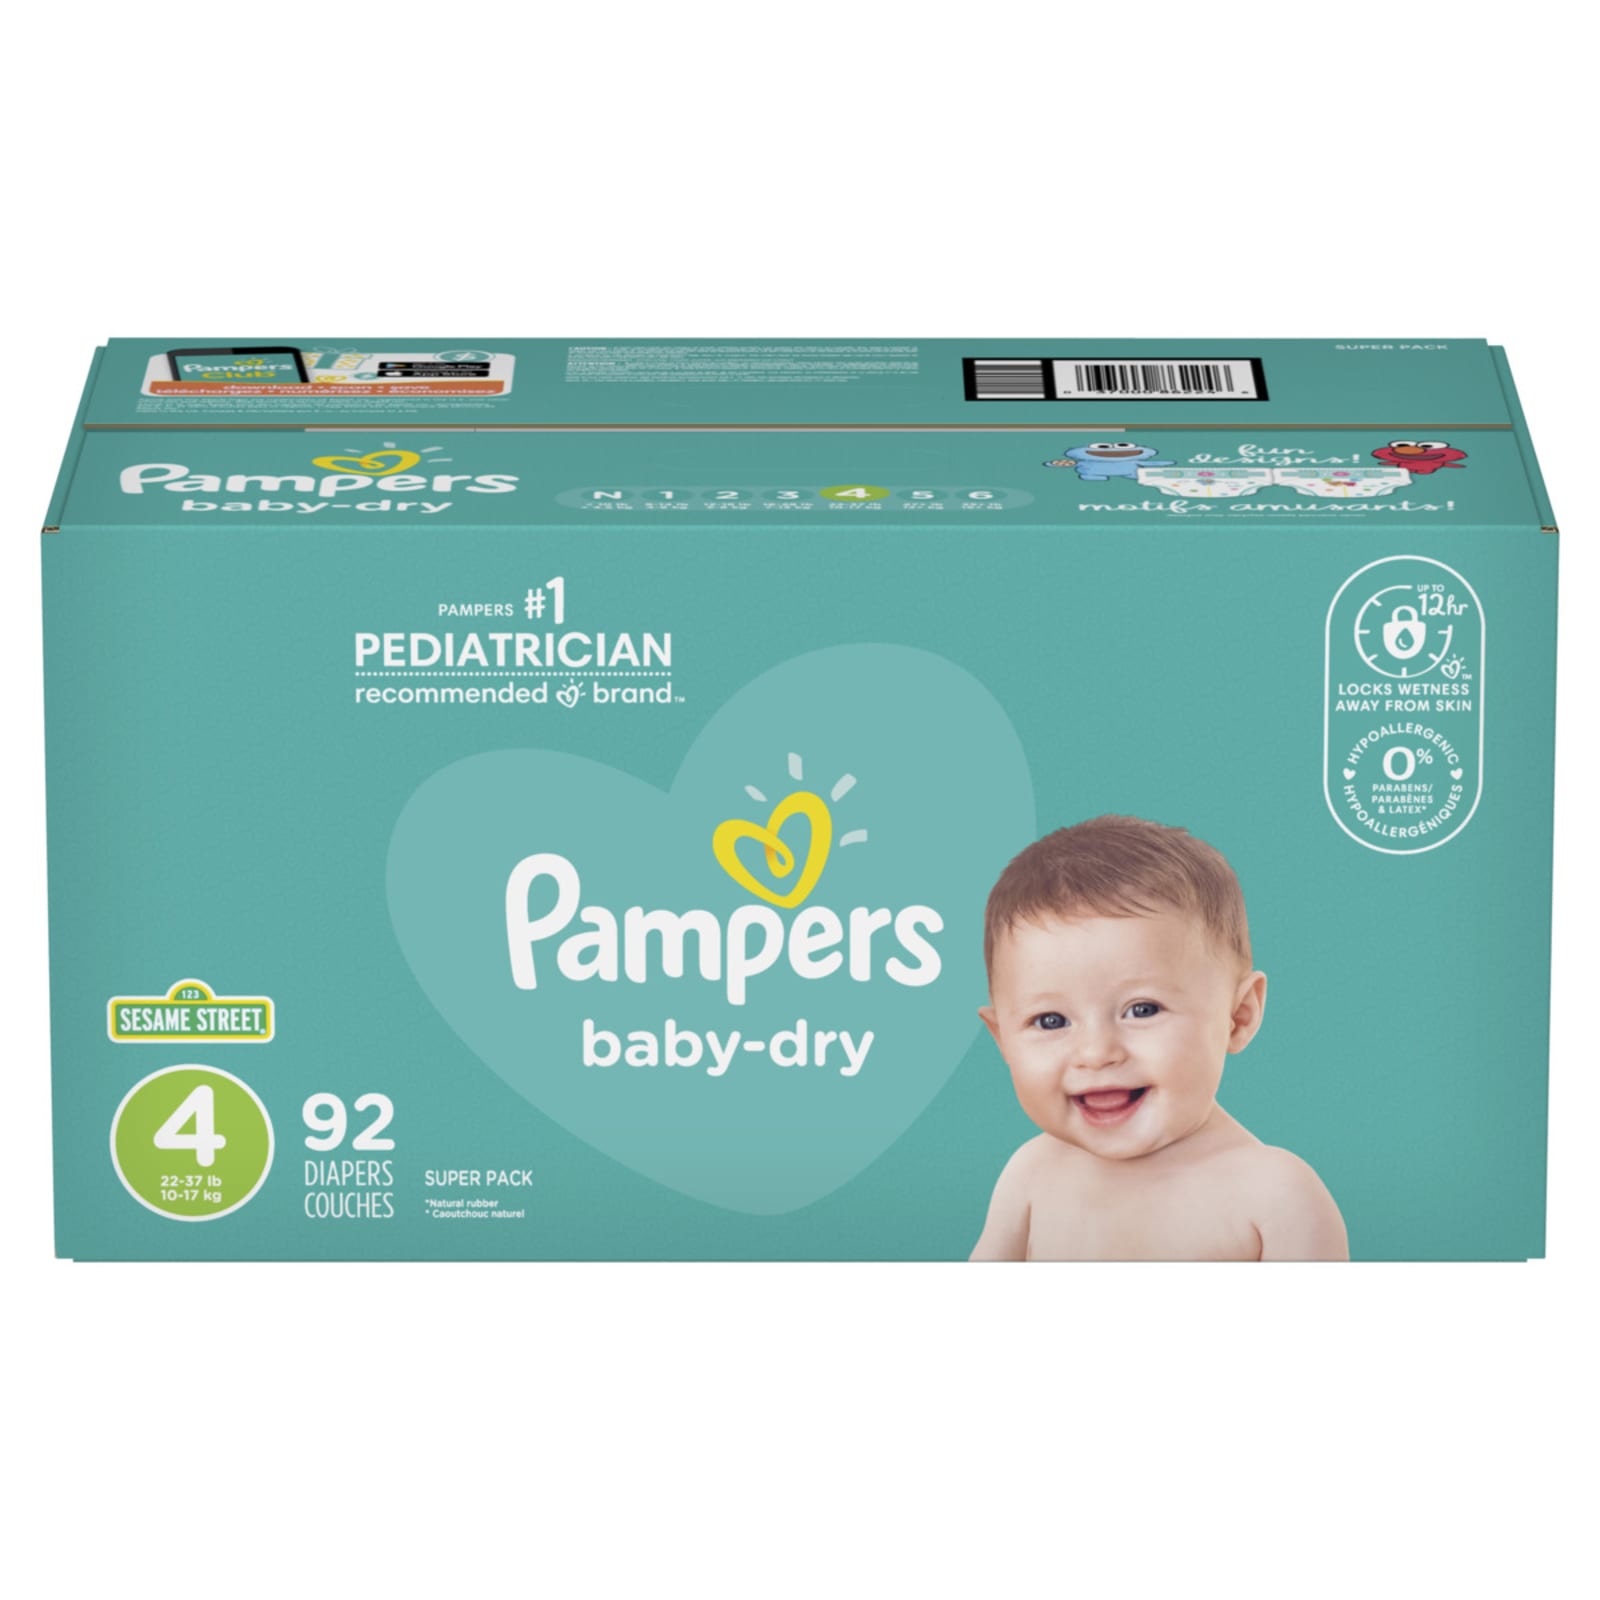 Baby Dry Super Pack Size 4 Diapers - 92 Ct by Pampers at Fleet Farm